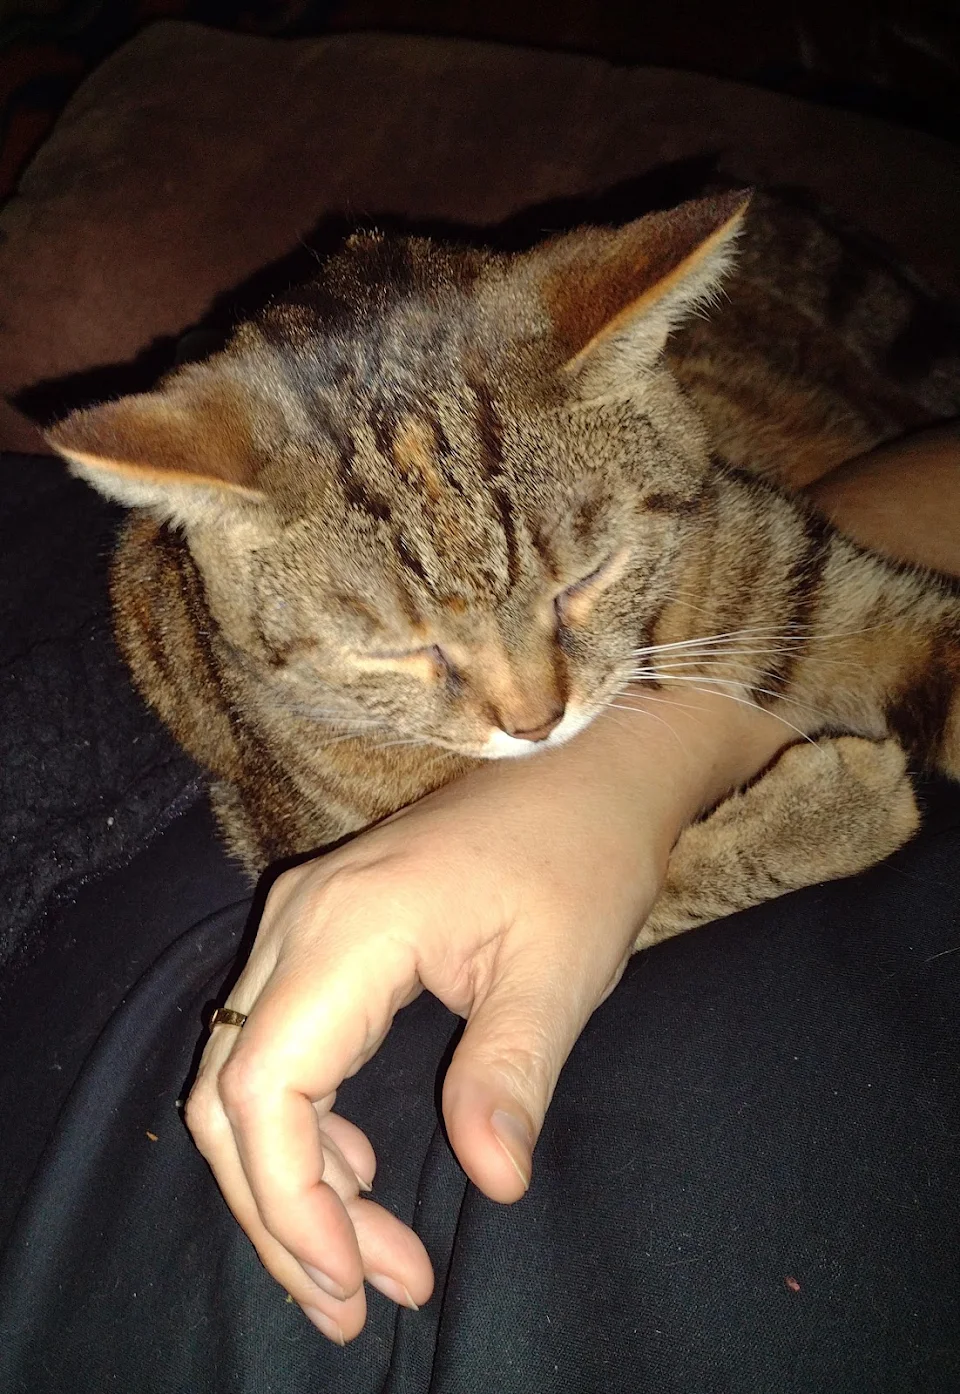 The cat who wouldn't come within six feet of a human a year ago, whose paw is now hugging my wrist